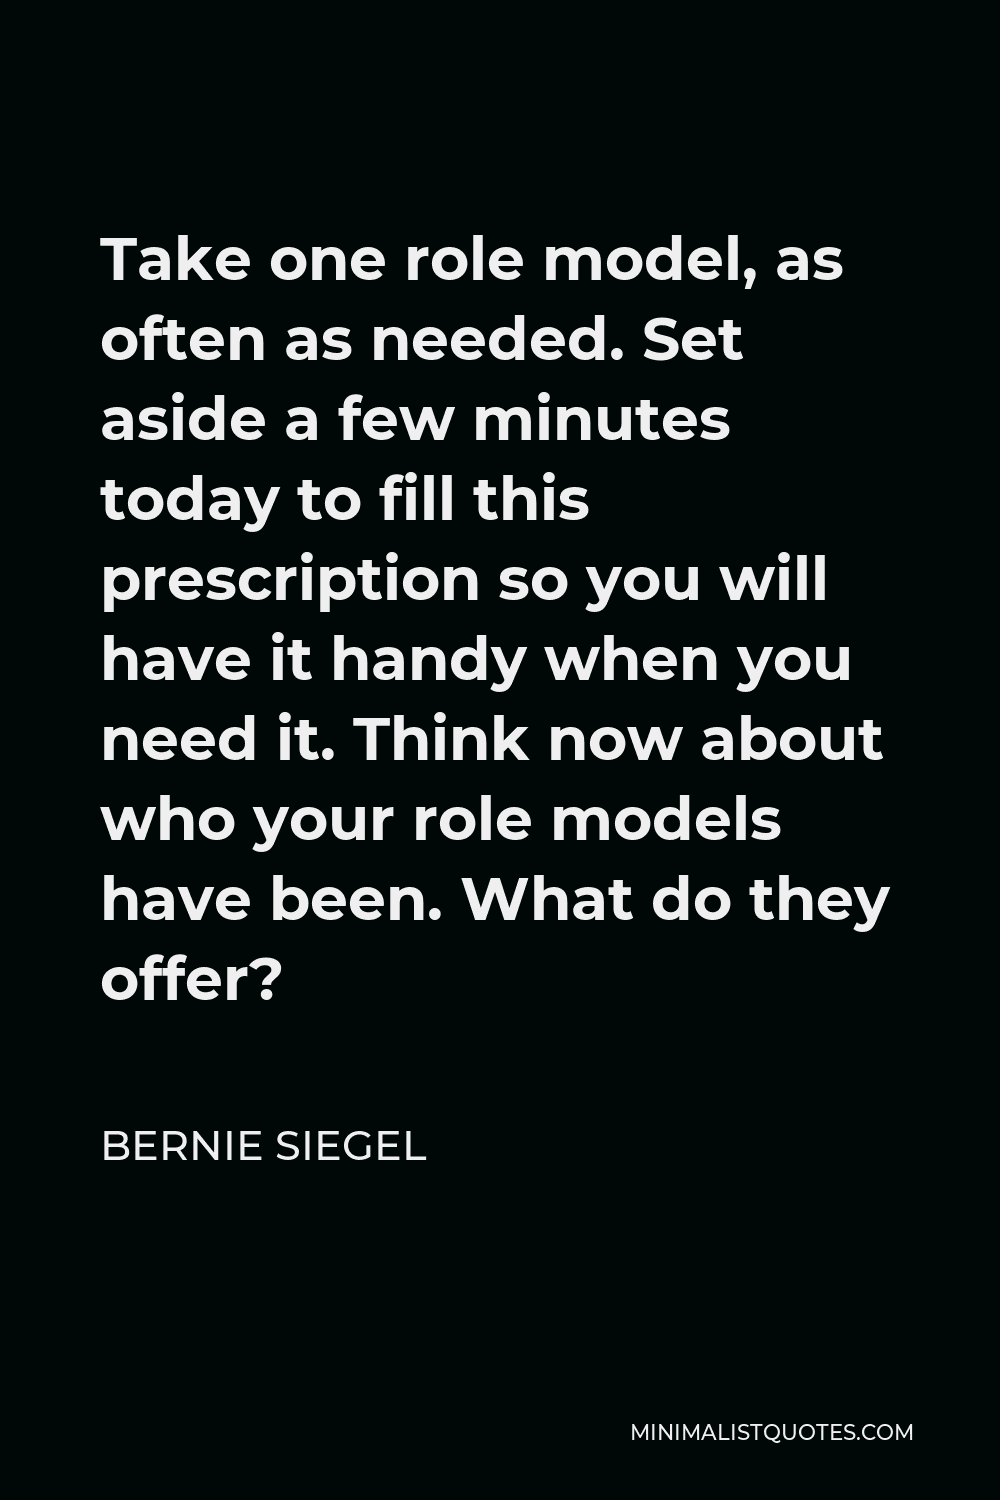 Bernie Siegel Quote - Take one role model, as often as needed. Set aside a few minutes today to fill this prescription so you will have it handy when you need it. Think now about who your role models have been. What do they offer?